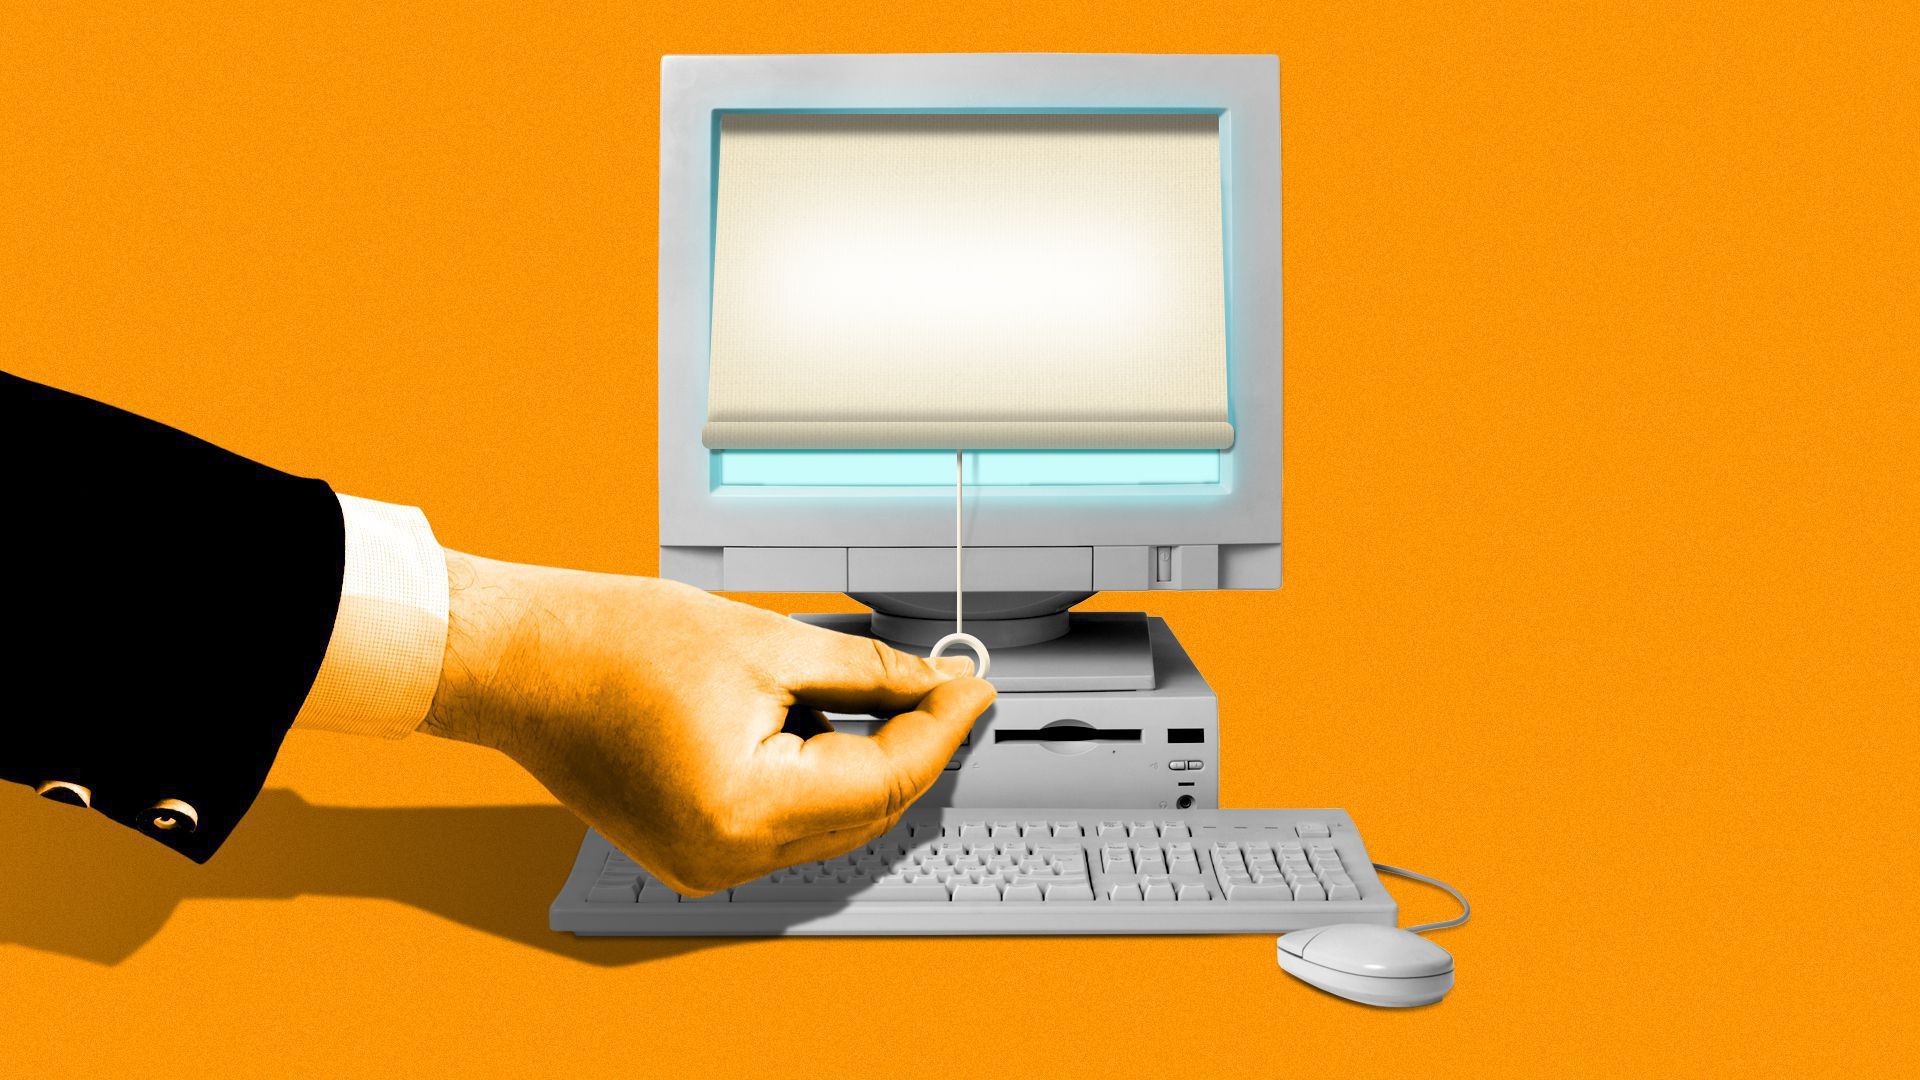 An illustration shows a hand pulling a blind down to cover a computer screen.